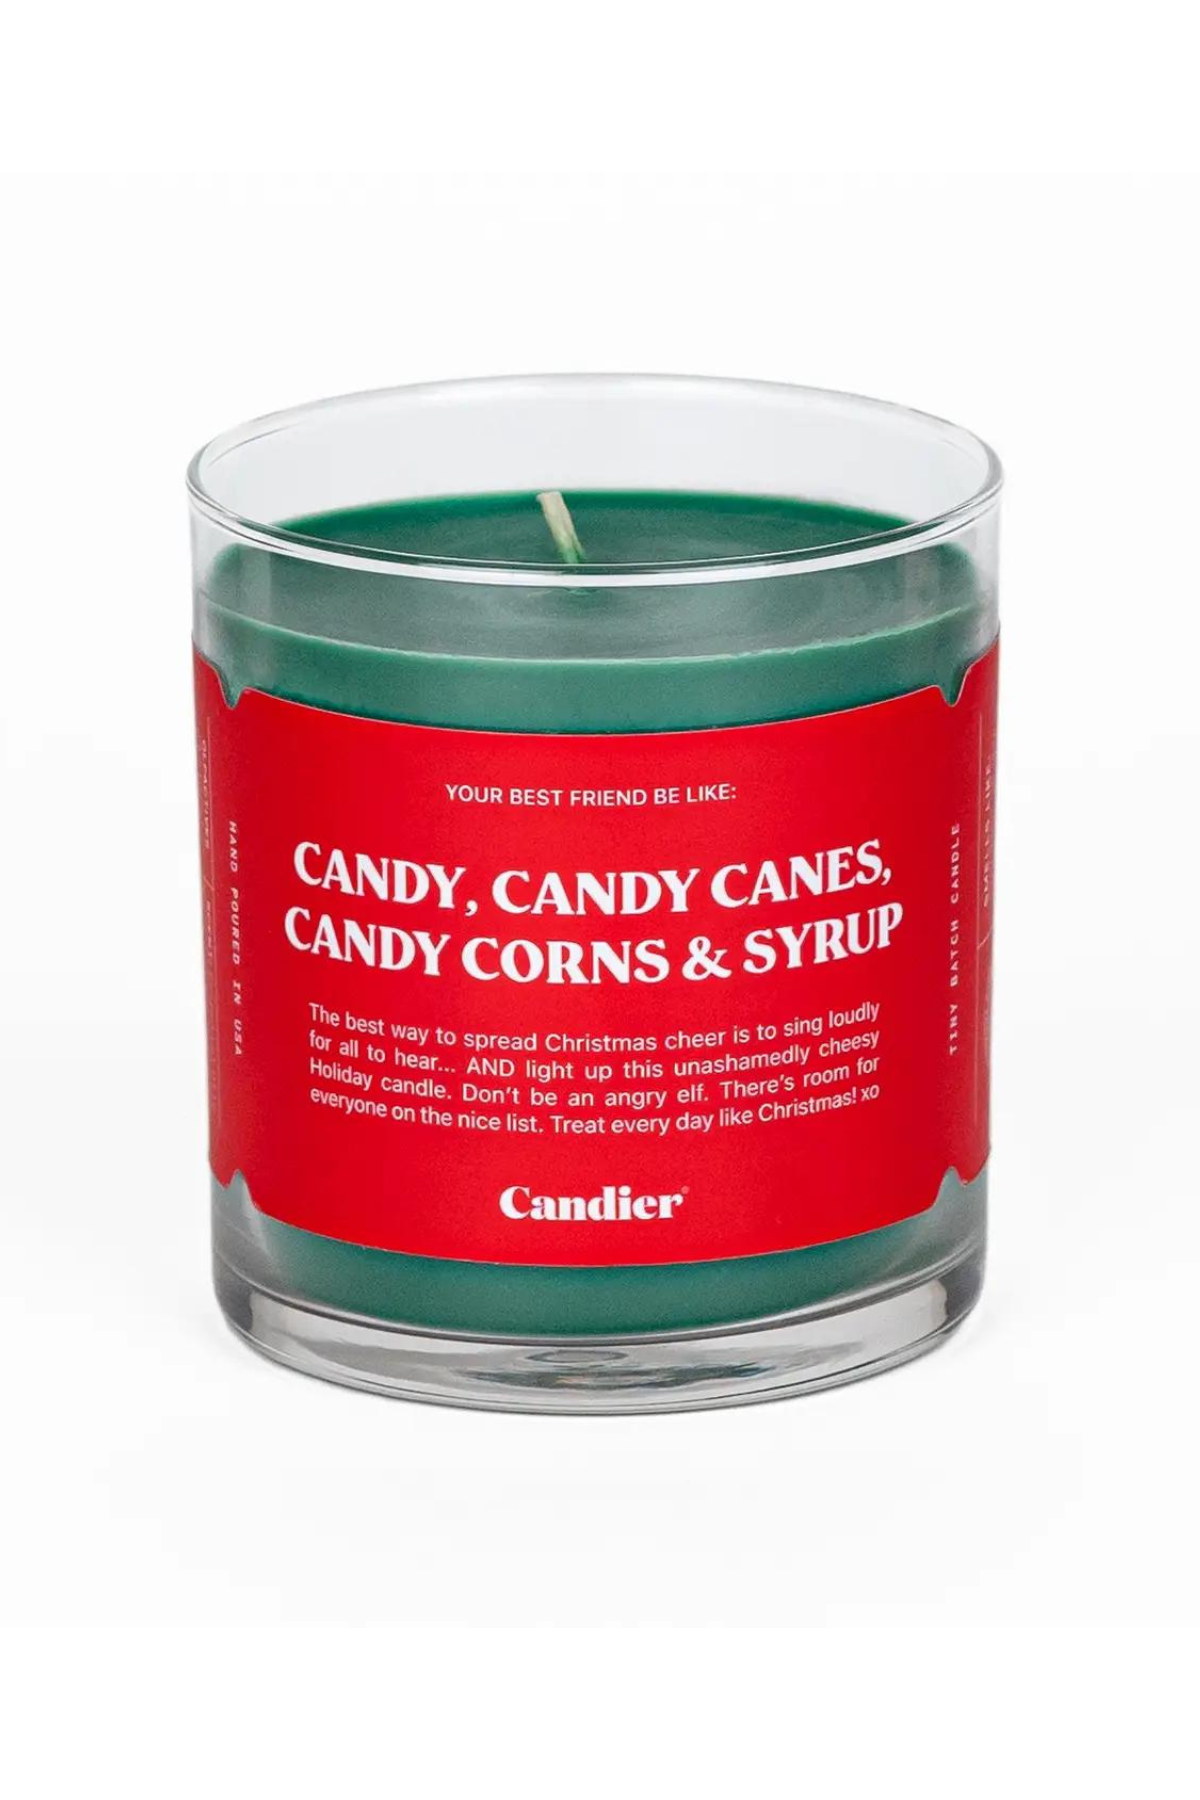 Candier Candy, Candy Canes, Candy Corn, & Syrup Candle